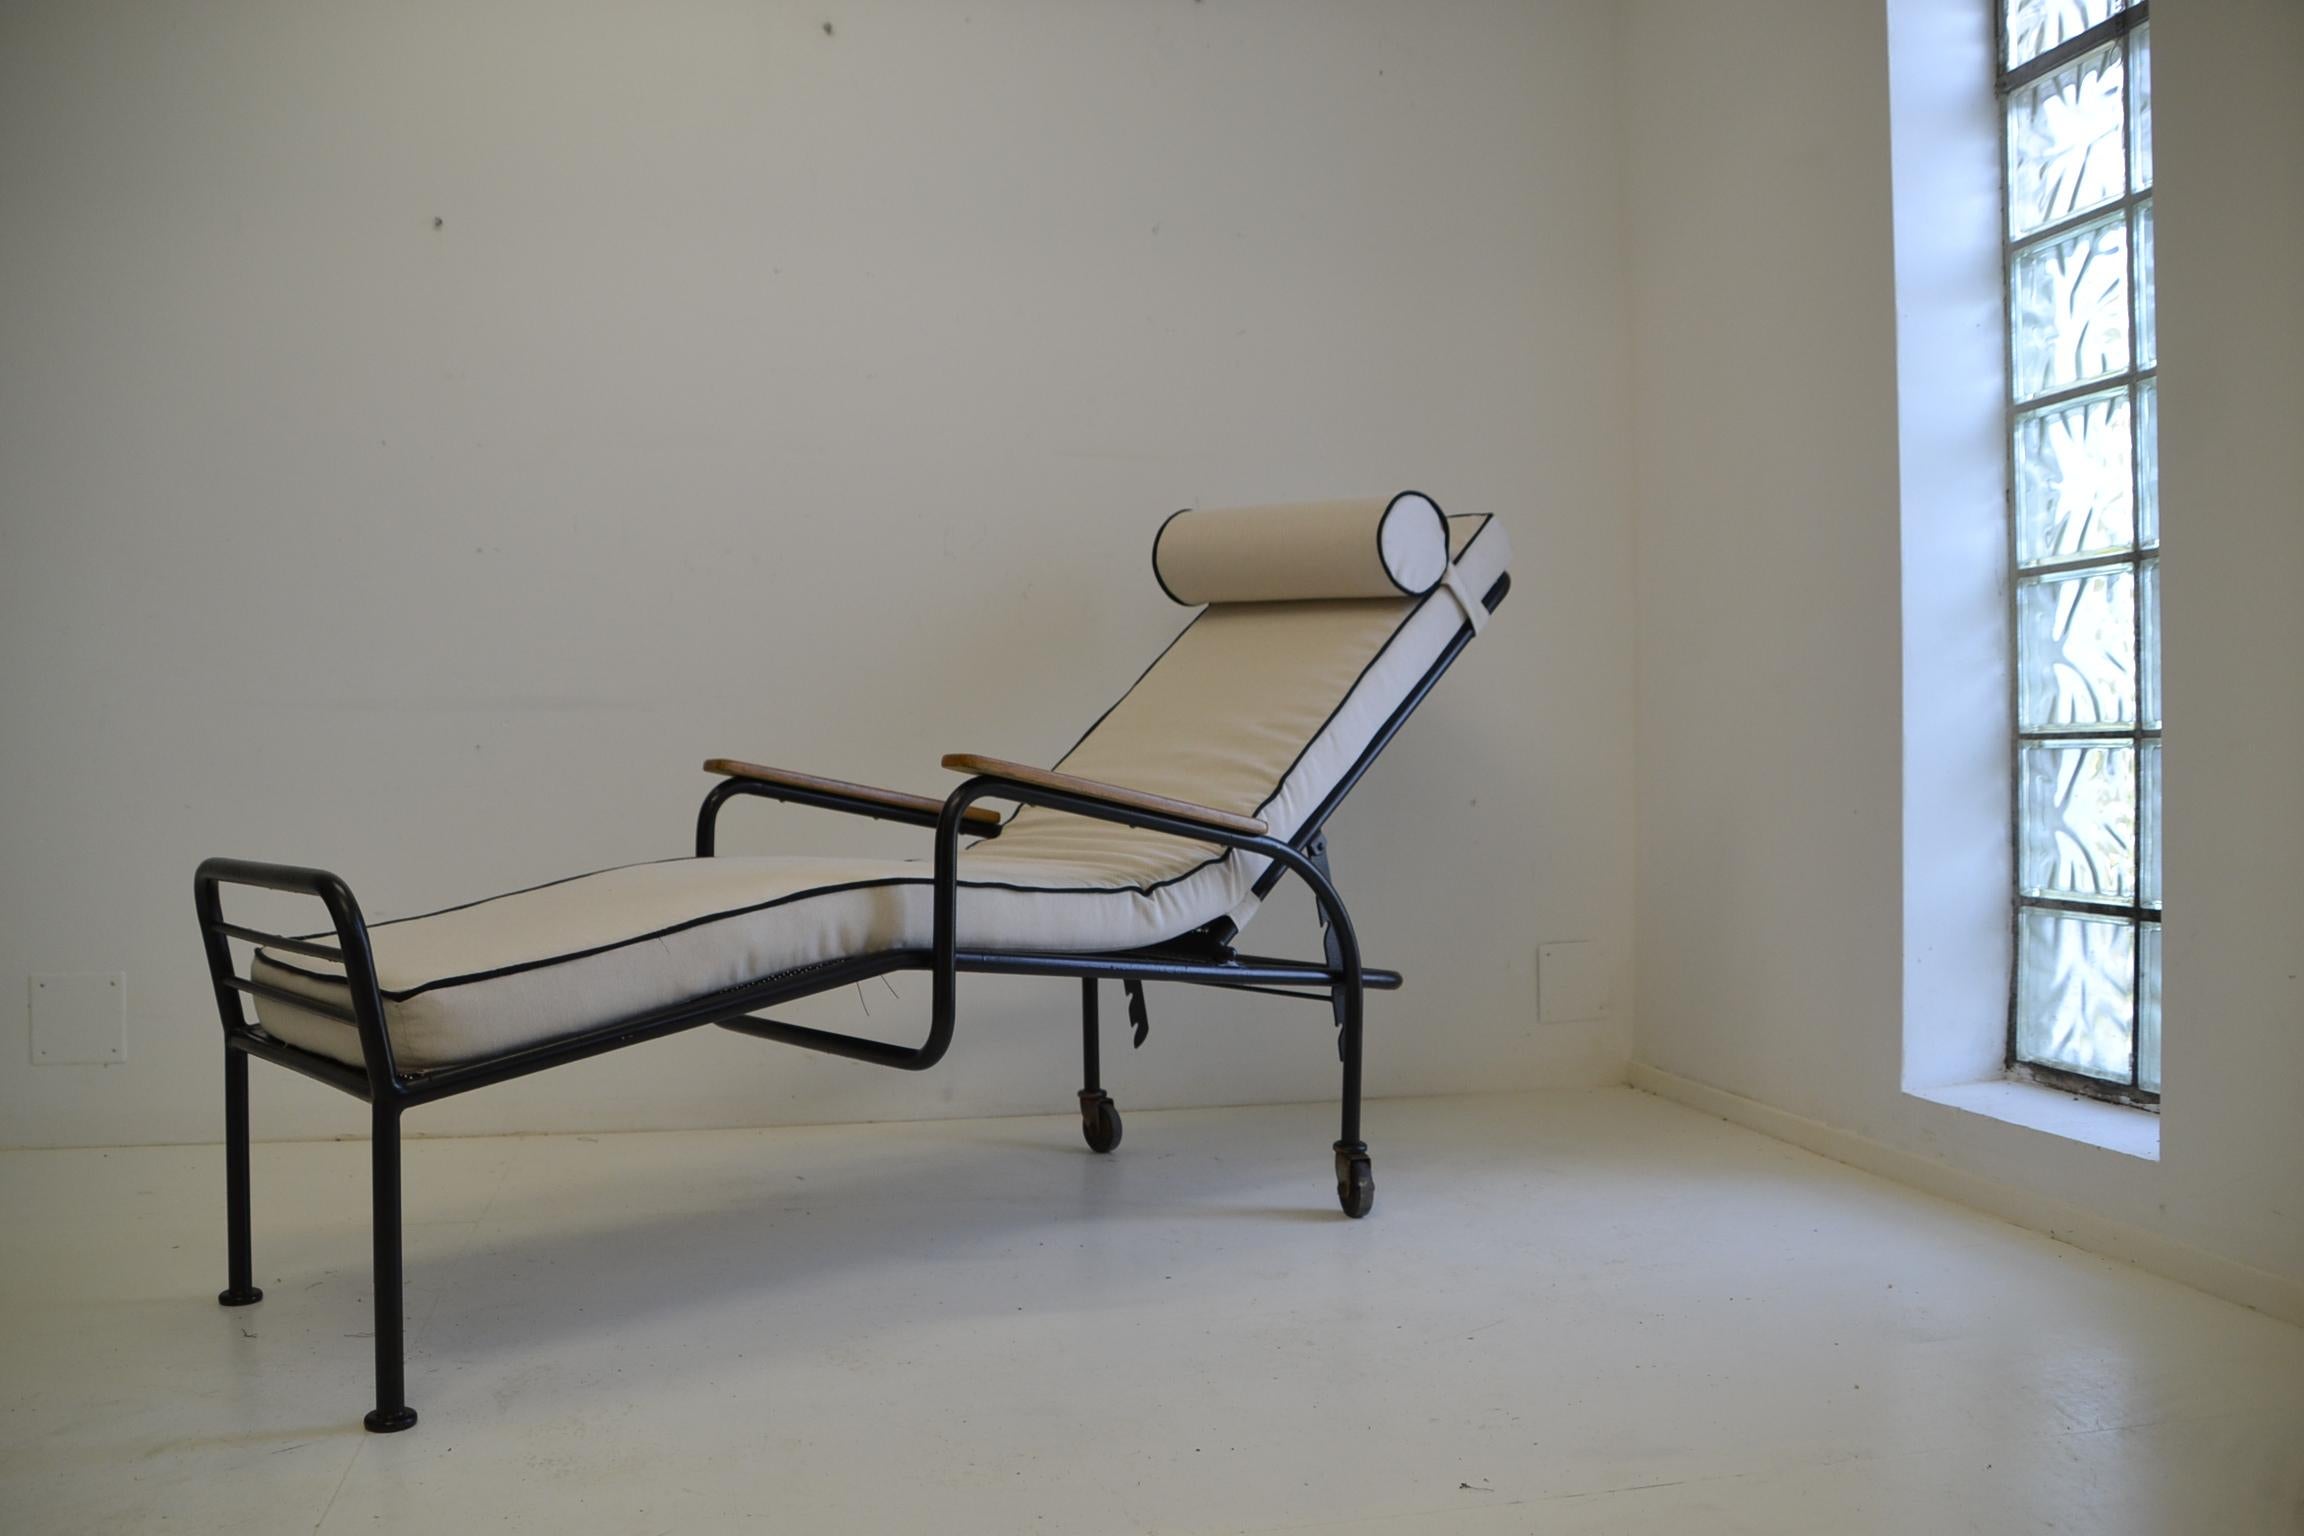 Lounge chair by Jean Prouvé and Jules Leleu
Lounge chair from Martel's sanatorium in Janville
Design Jean Prouvé, Jules Leleu manufacturer Les Ateliers Jean Prouvé
New mattress and fabric
Lacquered steel and oak
Old but not original